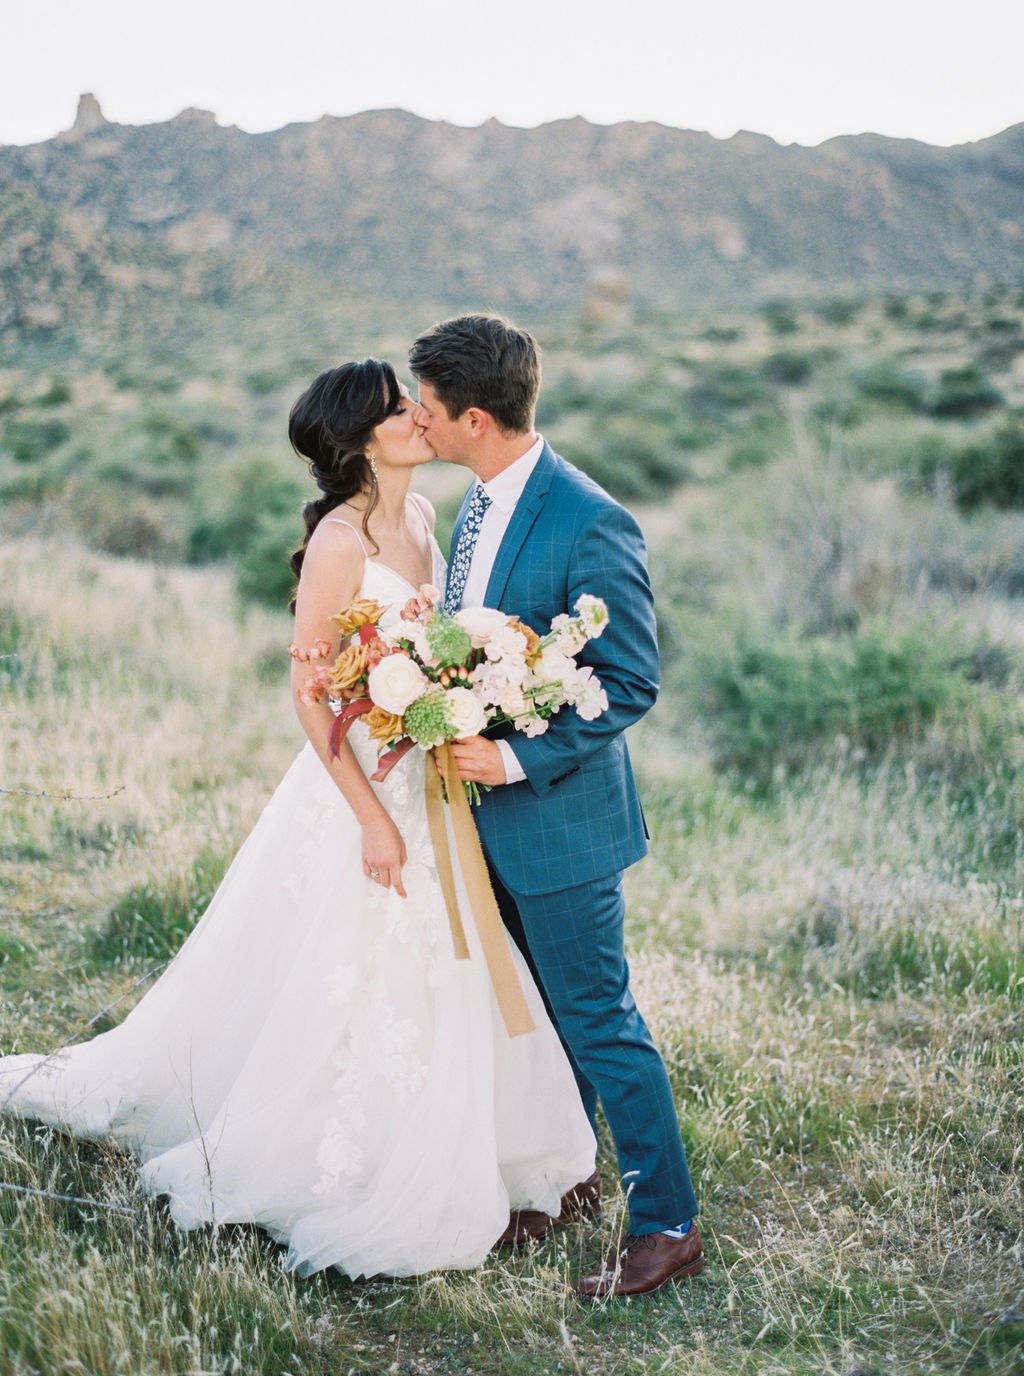 Bride and groom kissing in a field of wild grass with mountains in the back, groom holding a bouquet with trailing gold ribbon.